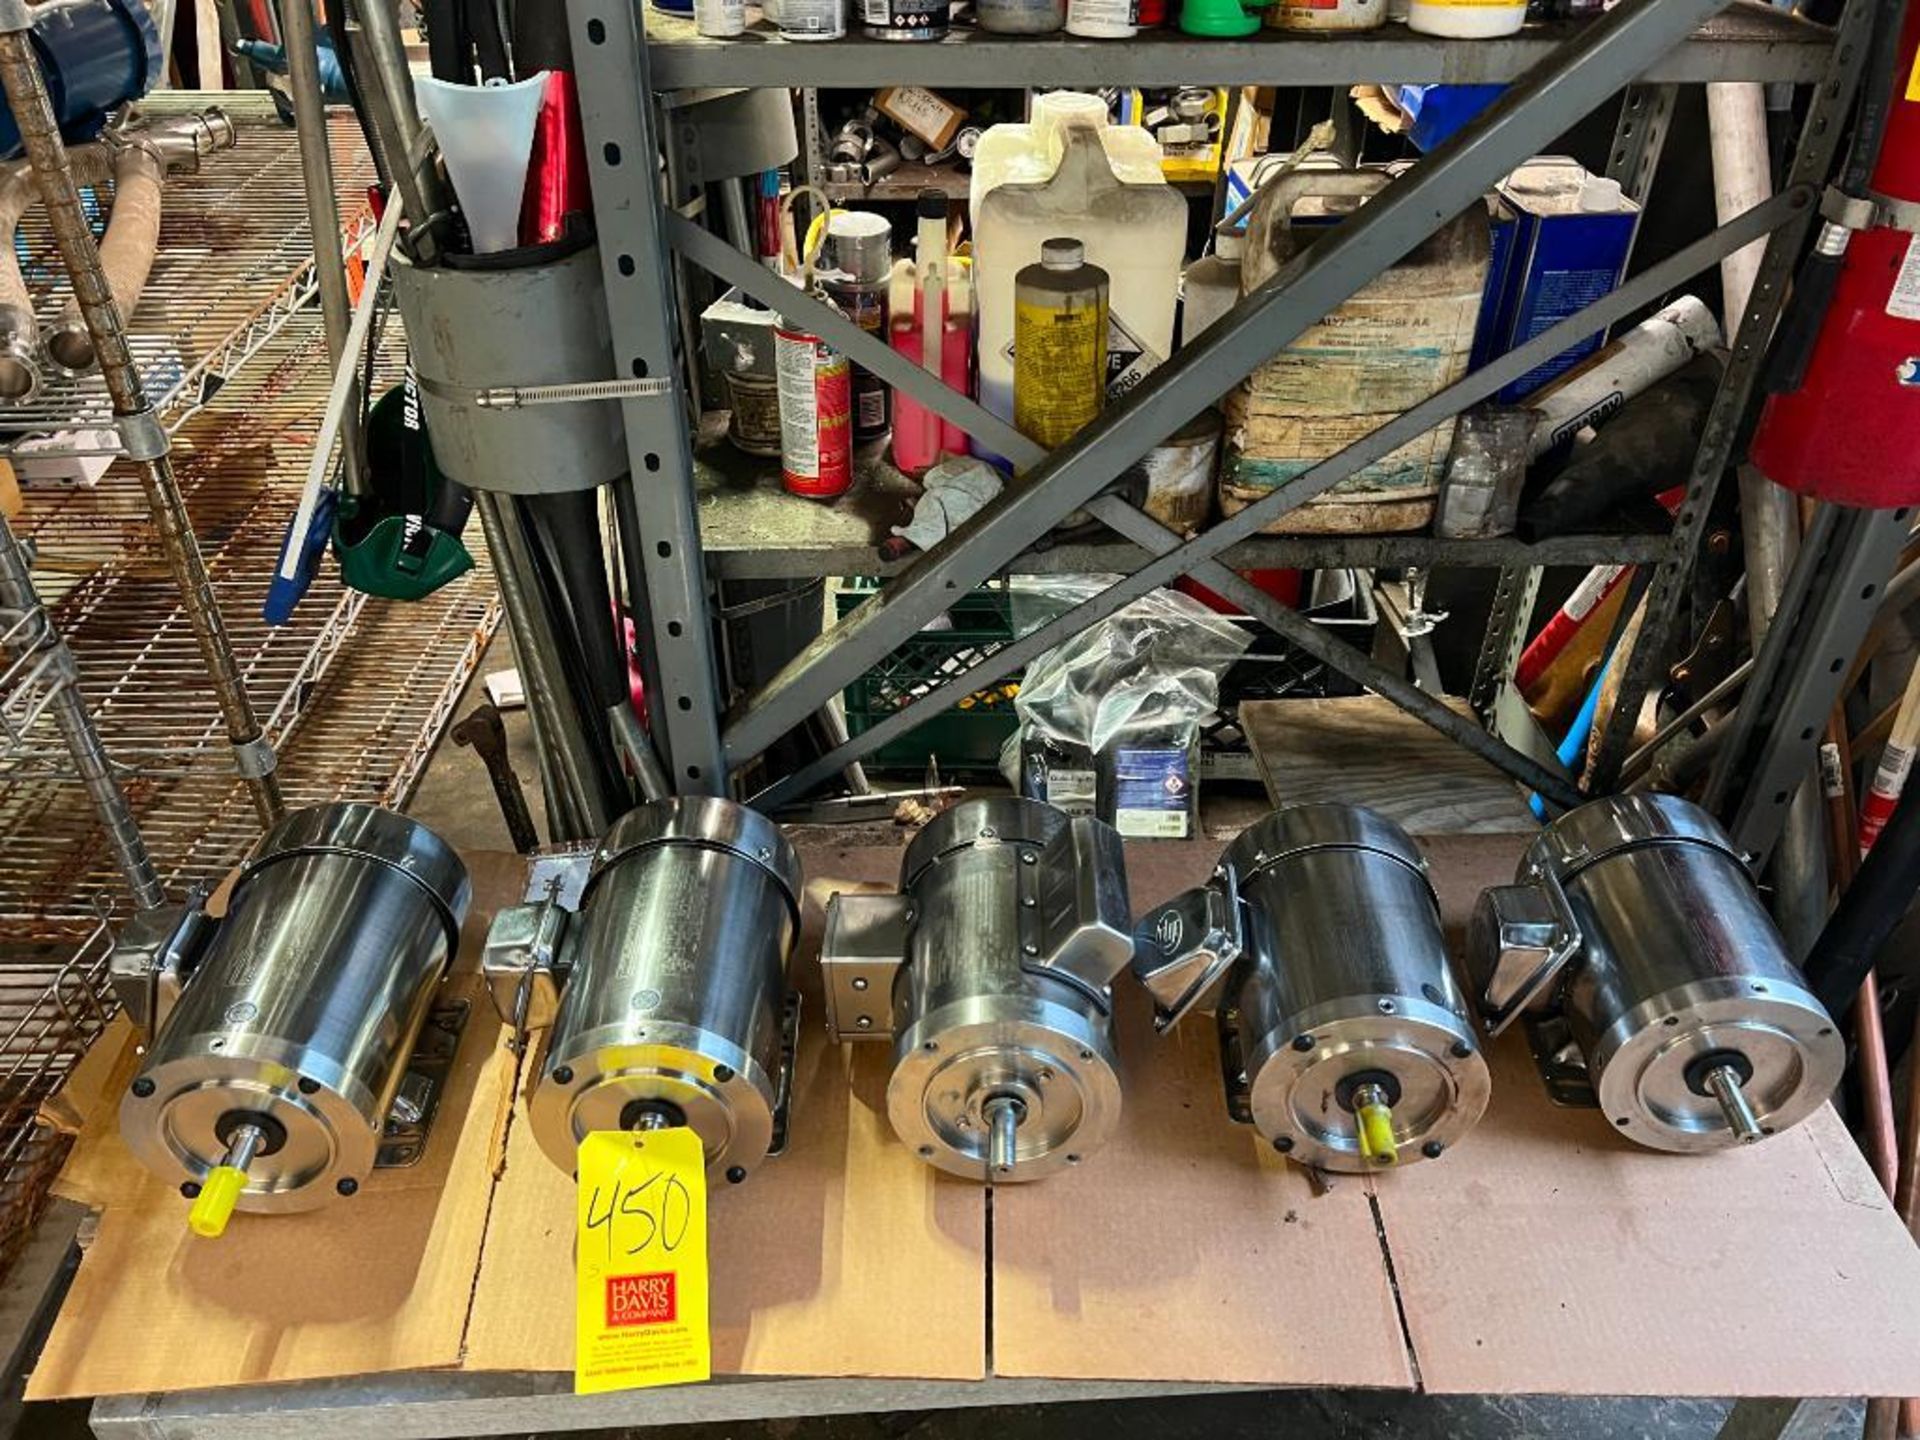 NEW (5) Connex Electric Motor S/S Clad Motor, .5 HP to 1 HP - Rigging Fee: $150